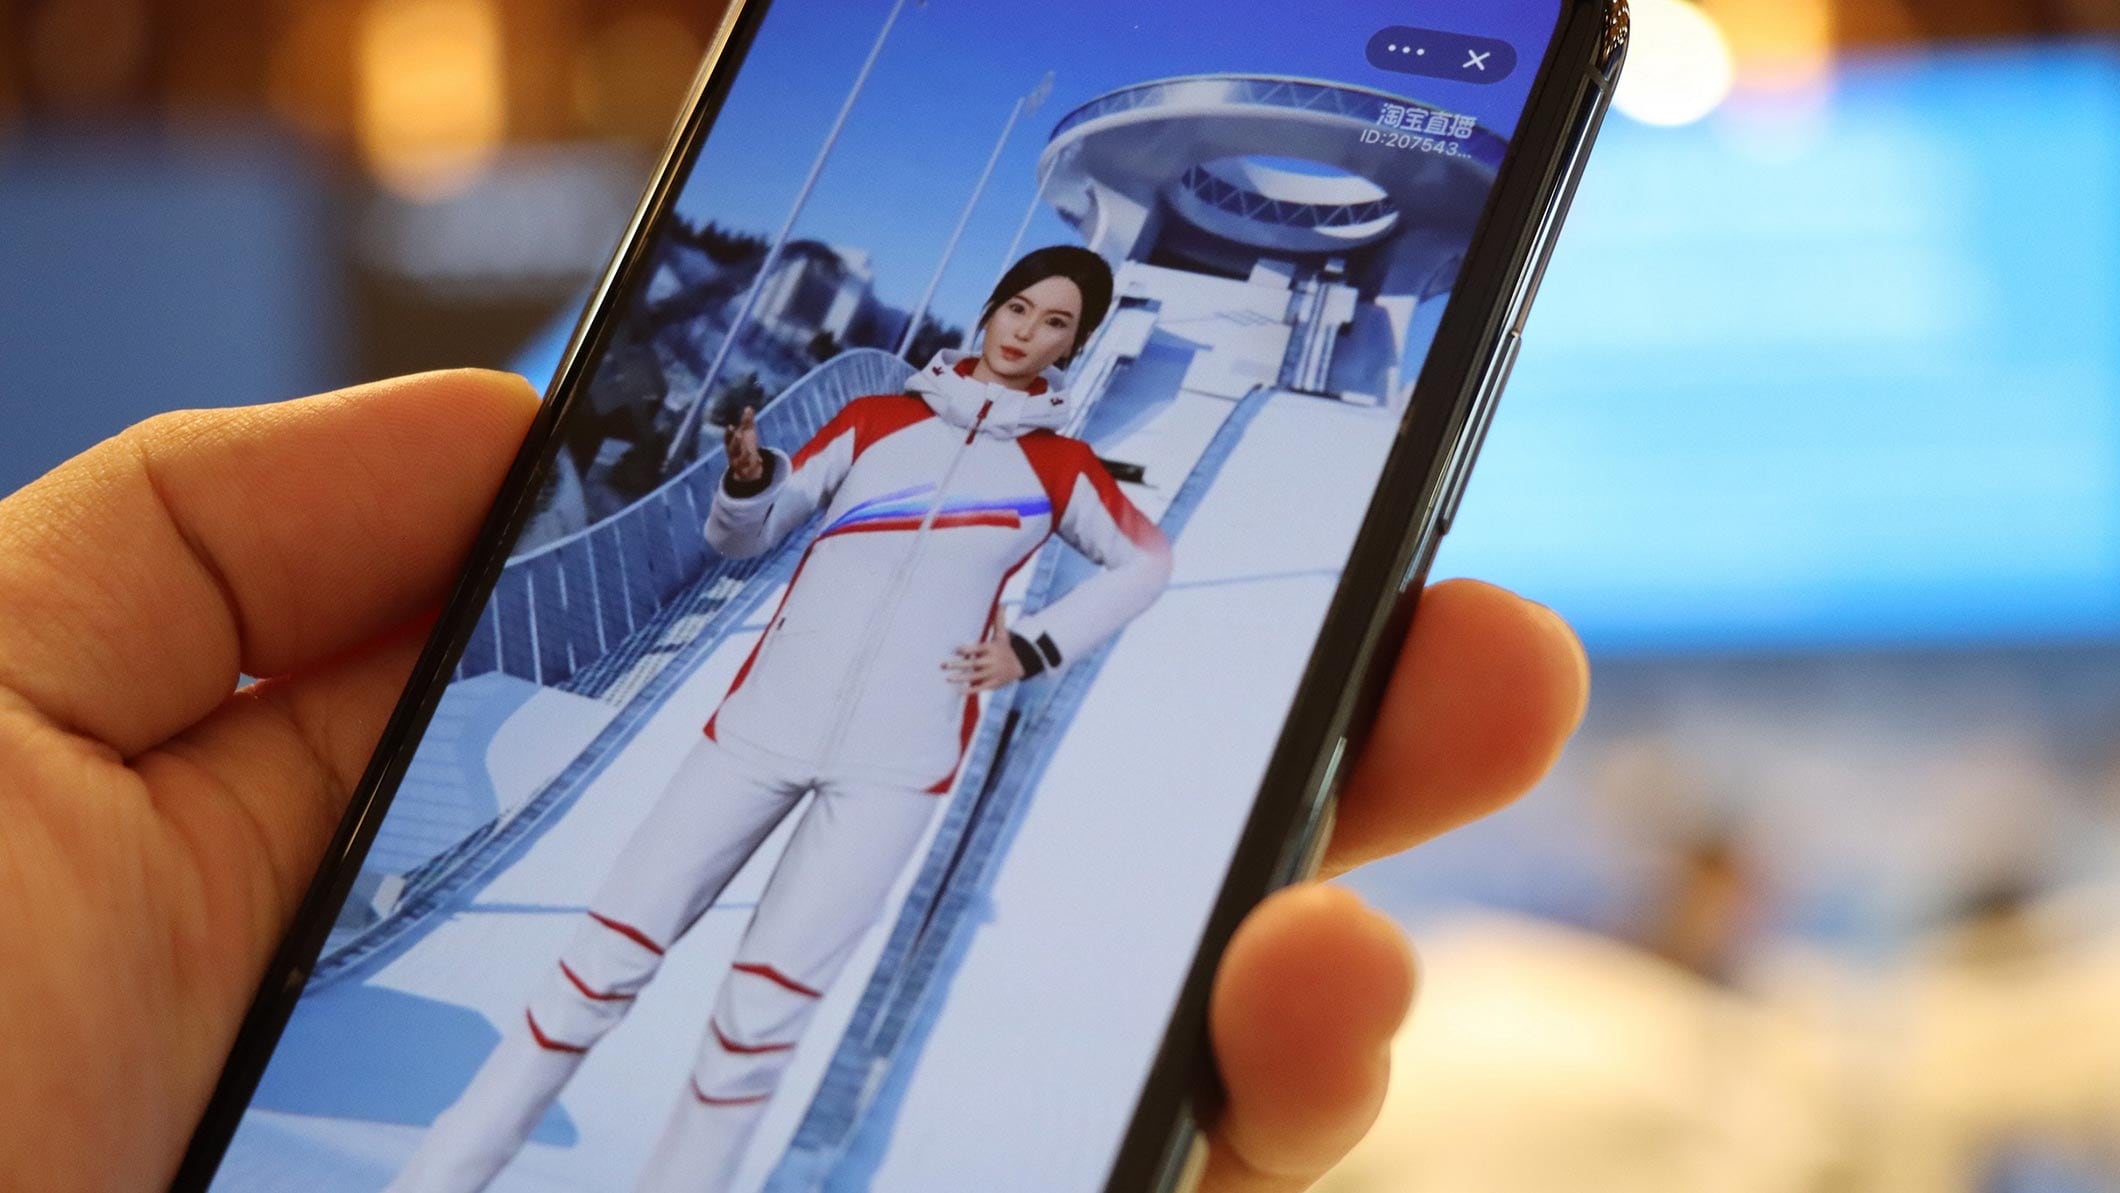 Alibaba unveils ‘Virtual Influencer’ for the Olympic Winter Games Beijing 2022